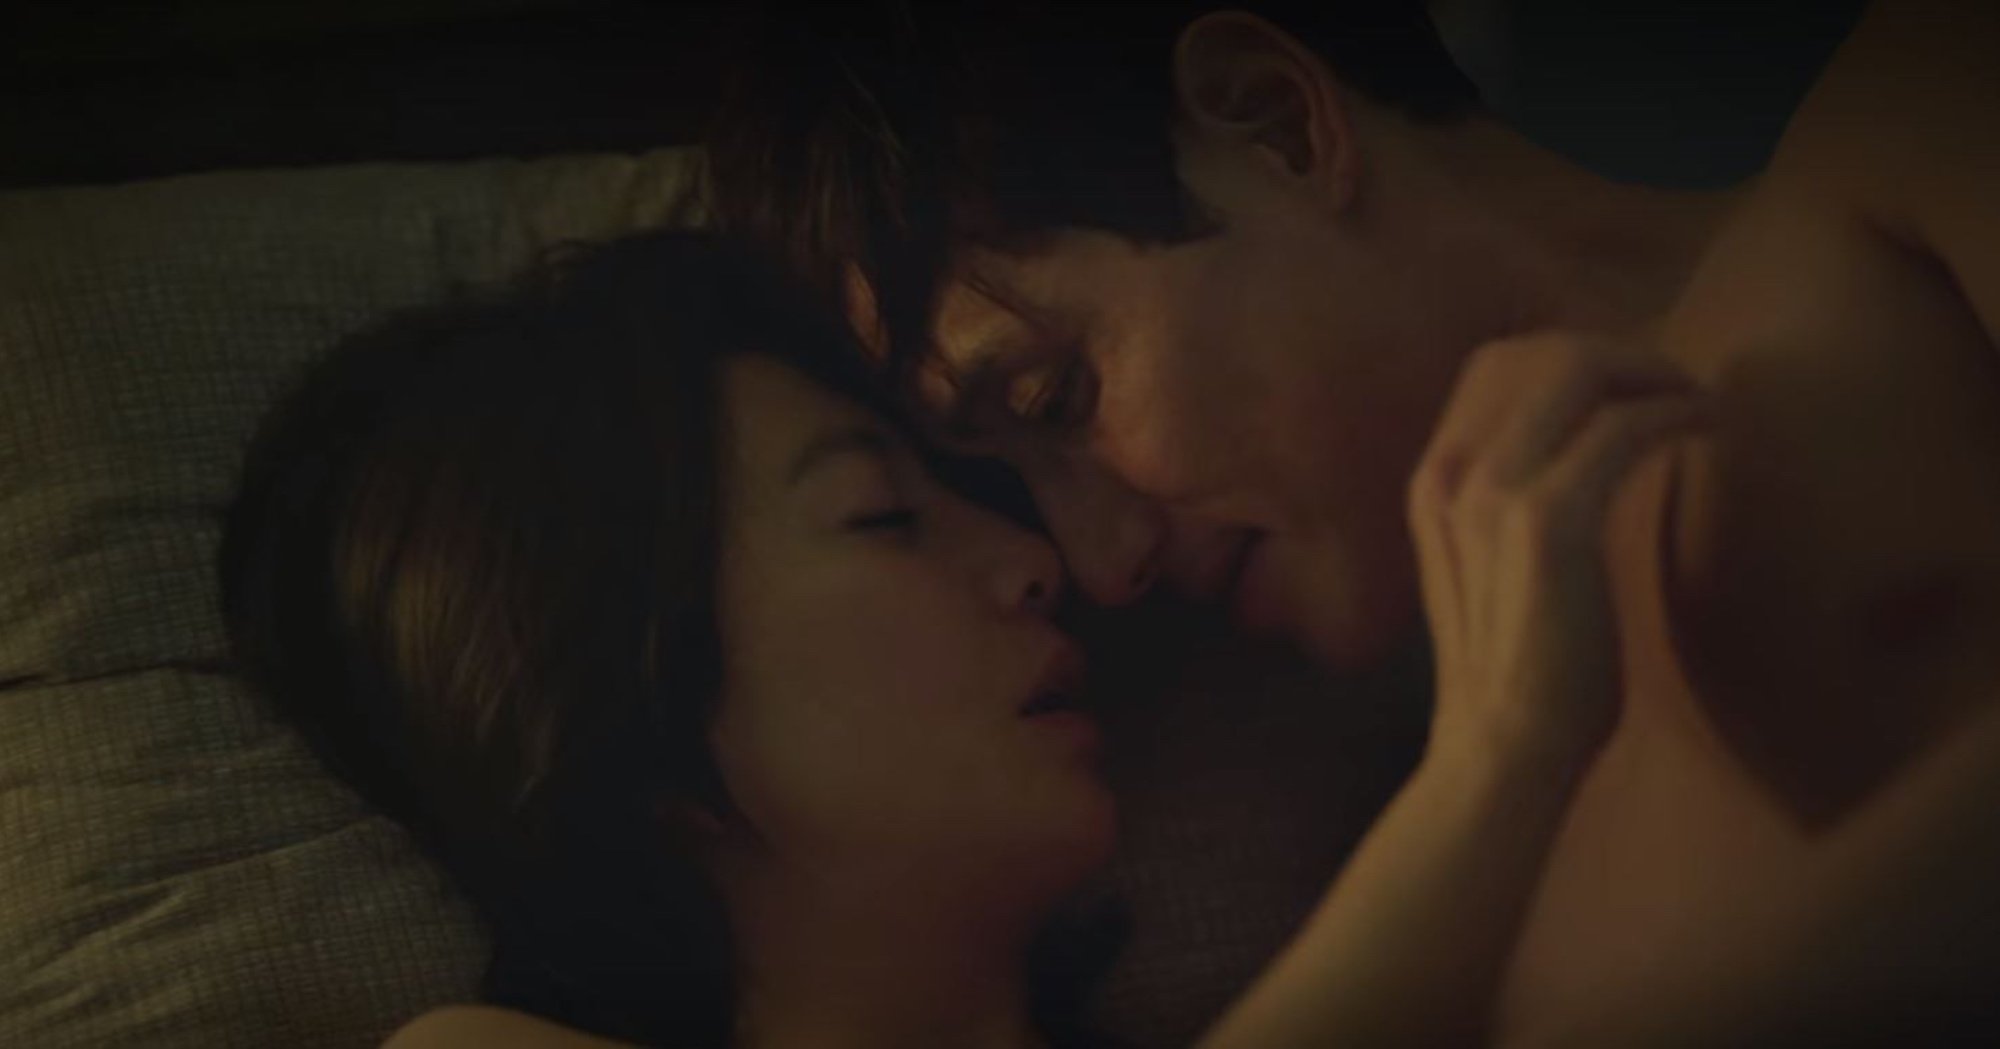 Kdrna Xxx - 4 of the Most Explicit Sex Scenes From K-Dramas